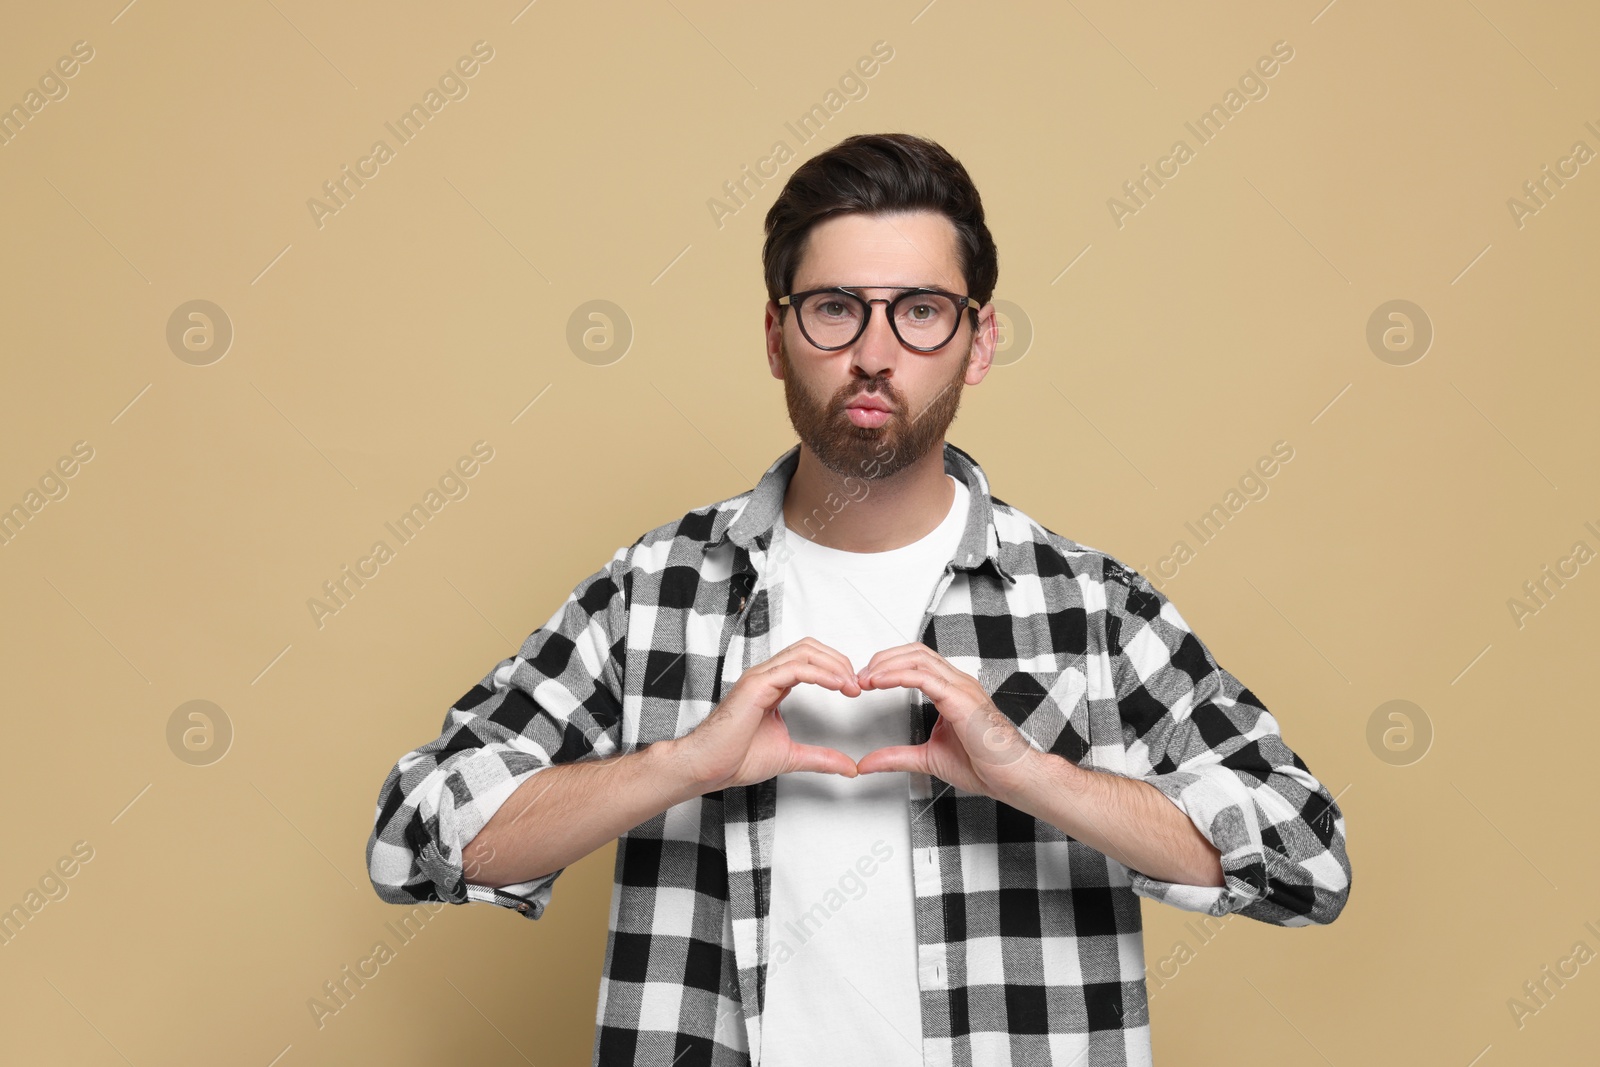 Photo of Handsome man making heart with hands and blowing kiss on beige background